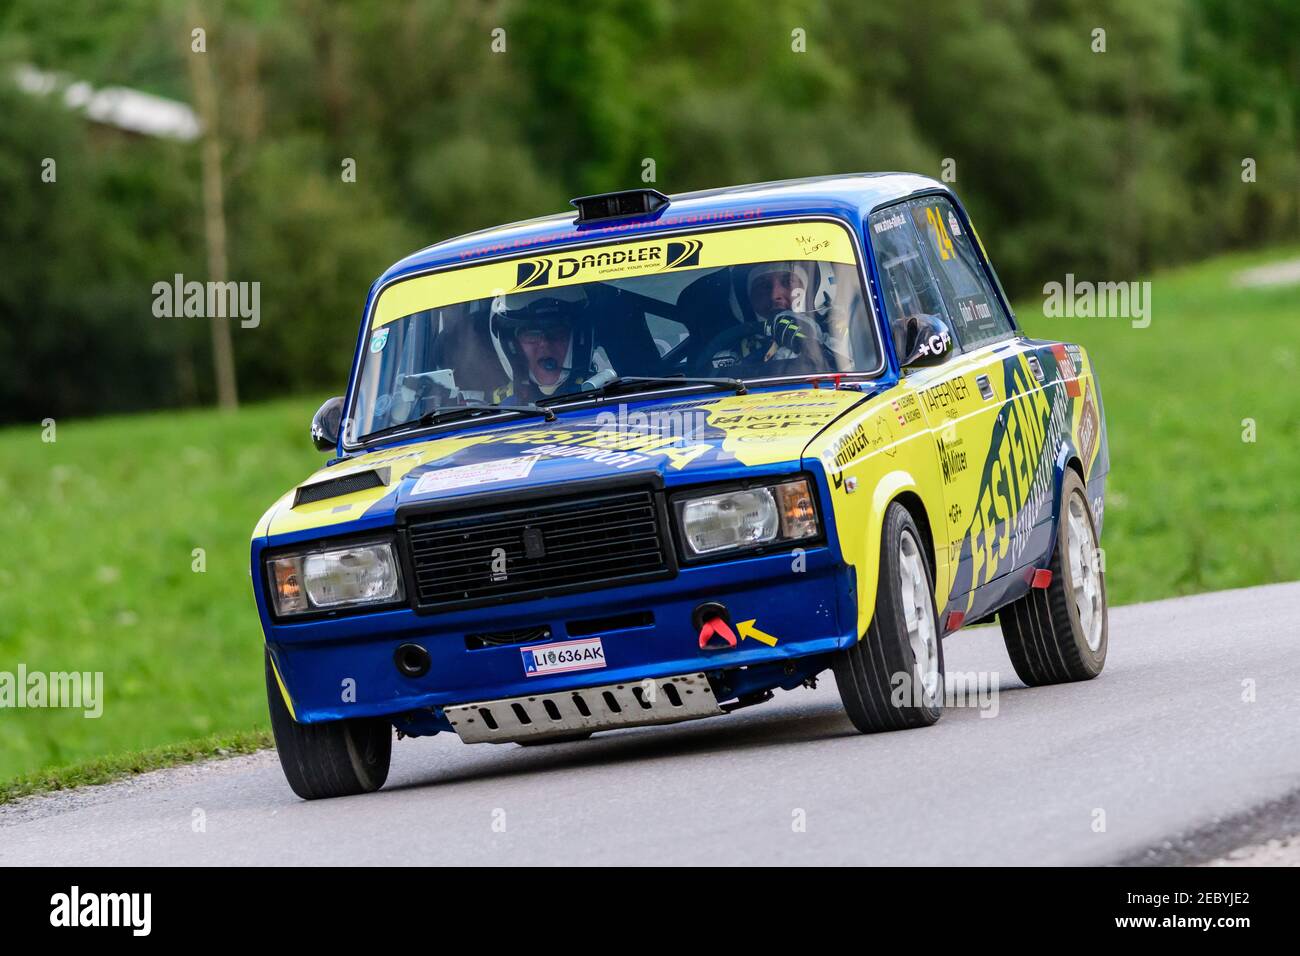 windischgarsten, austria, 15 sep 2017, austrian rallye legends, arboe rallye , competition for vintage race cars and rallye cars Stock Photo